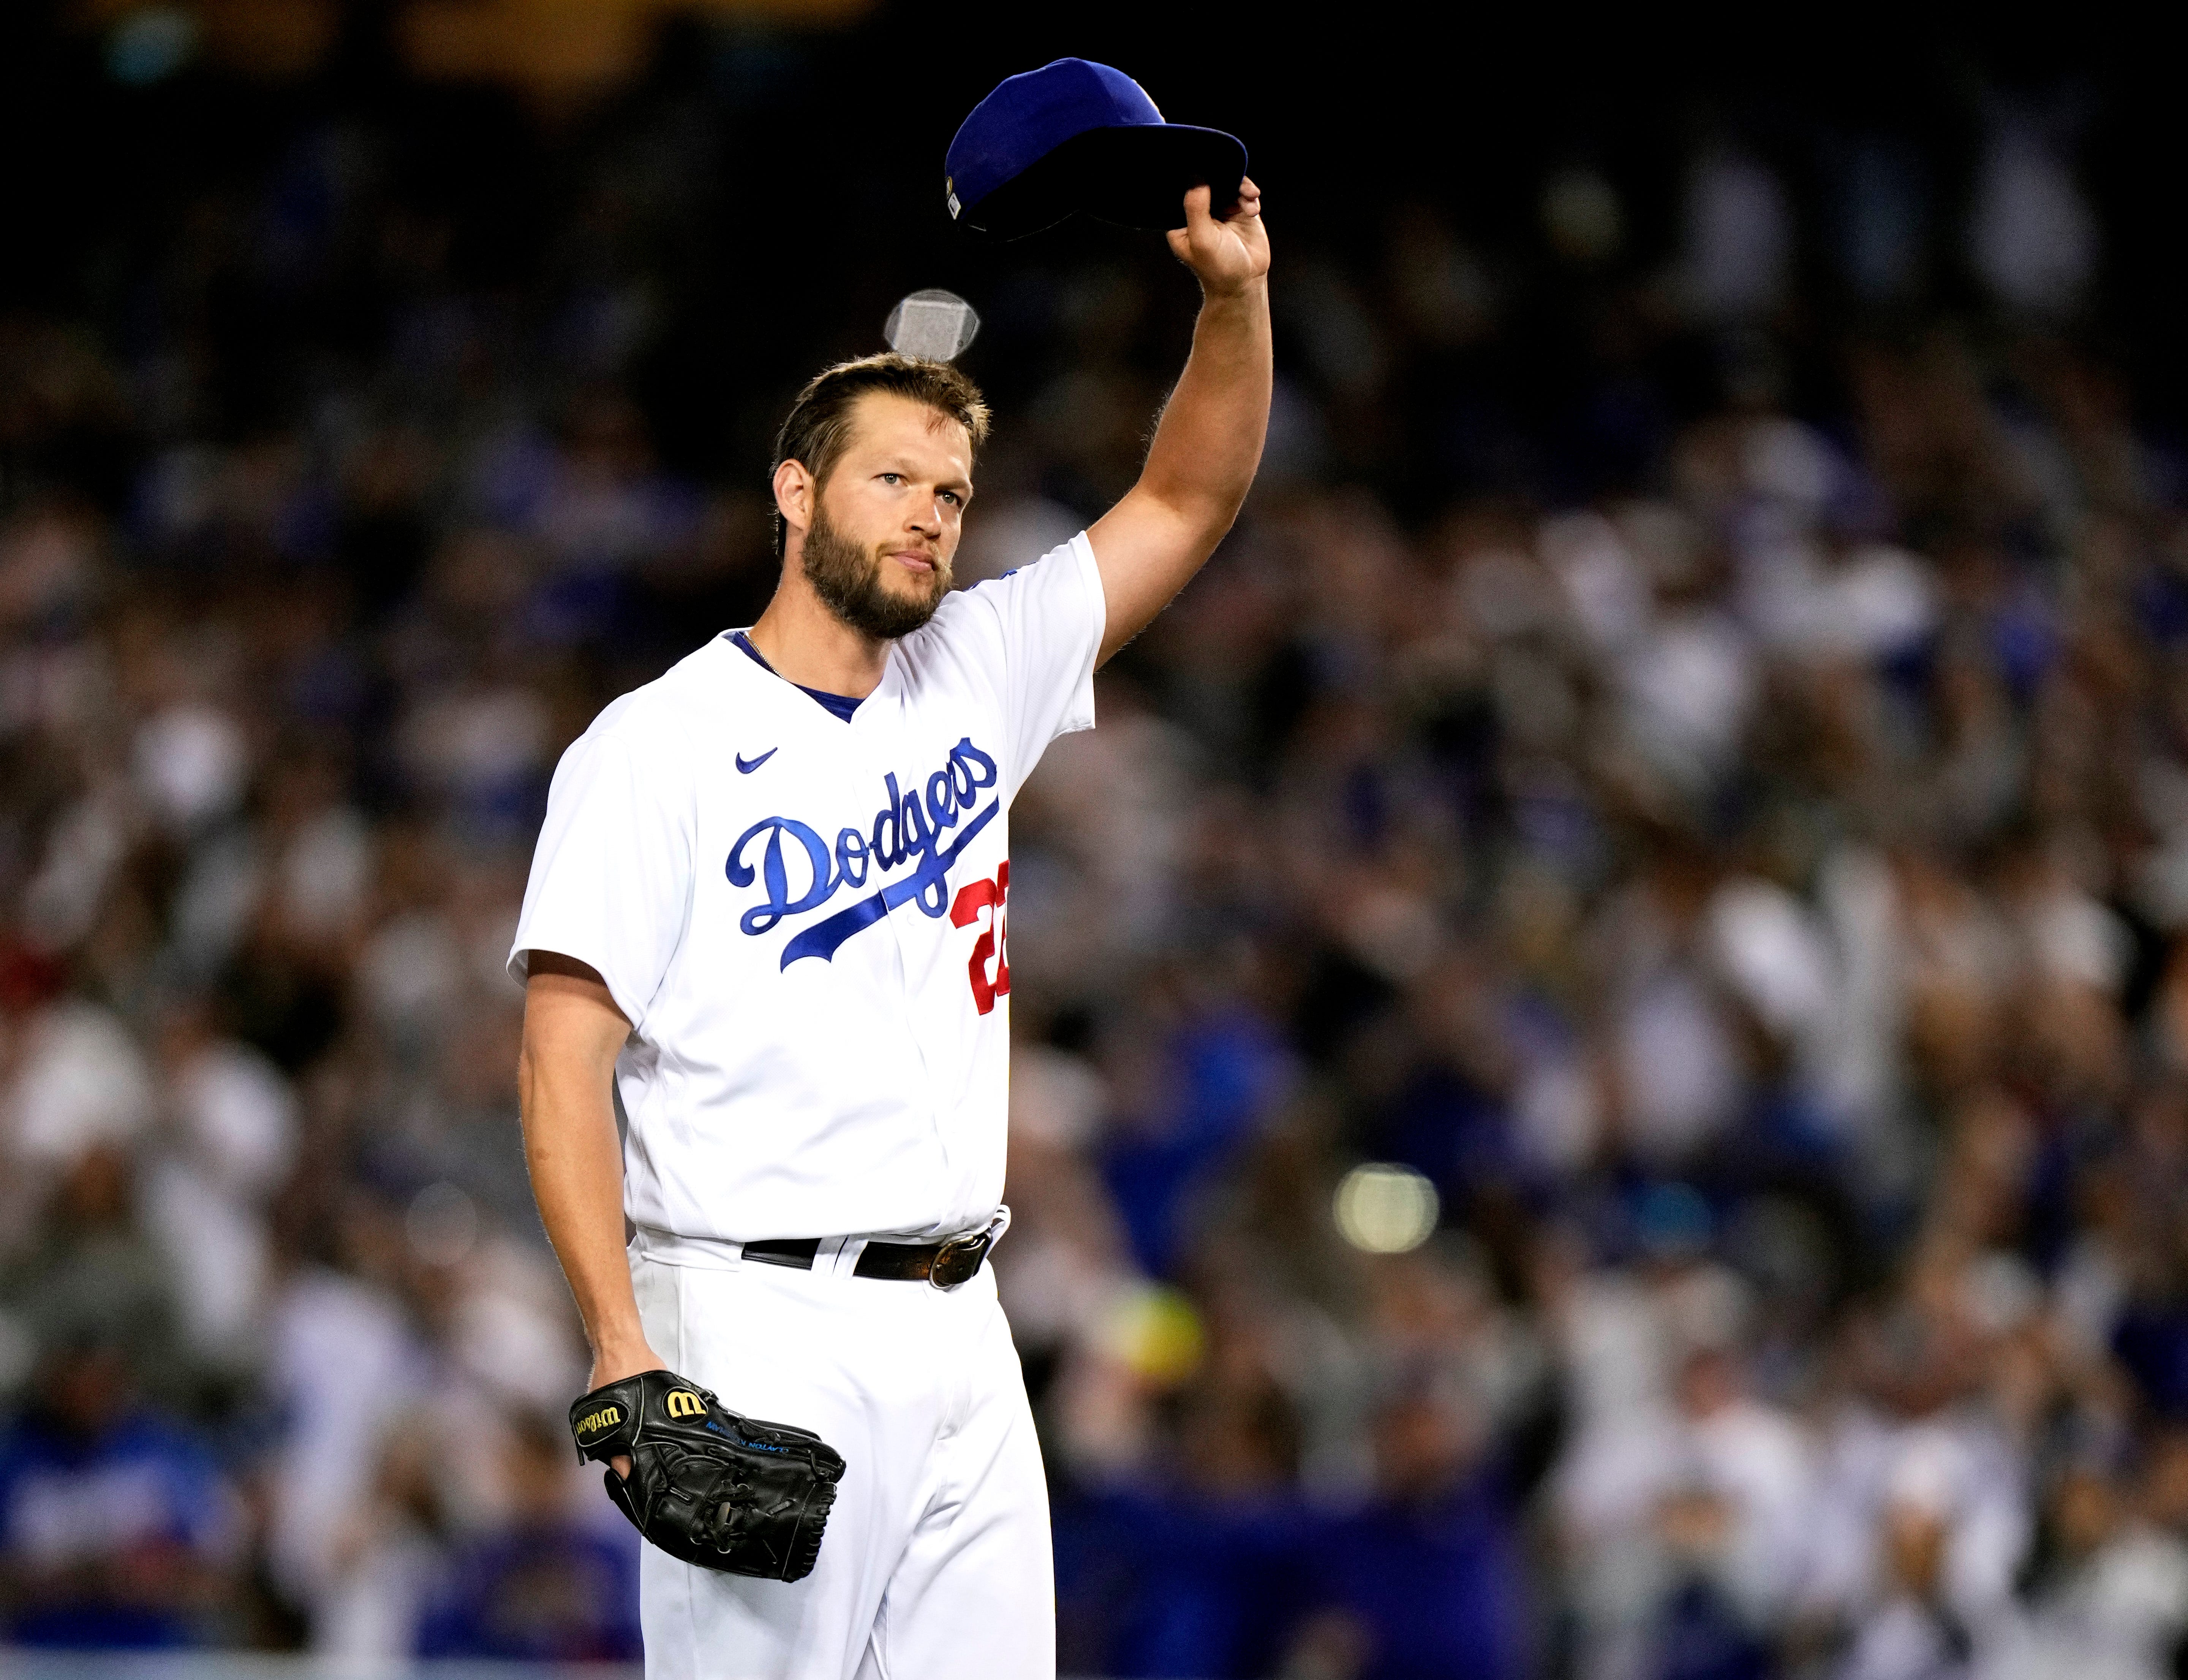 Dodgers pull Clayton Kershaw after seven perfect innings, give up